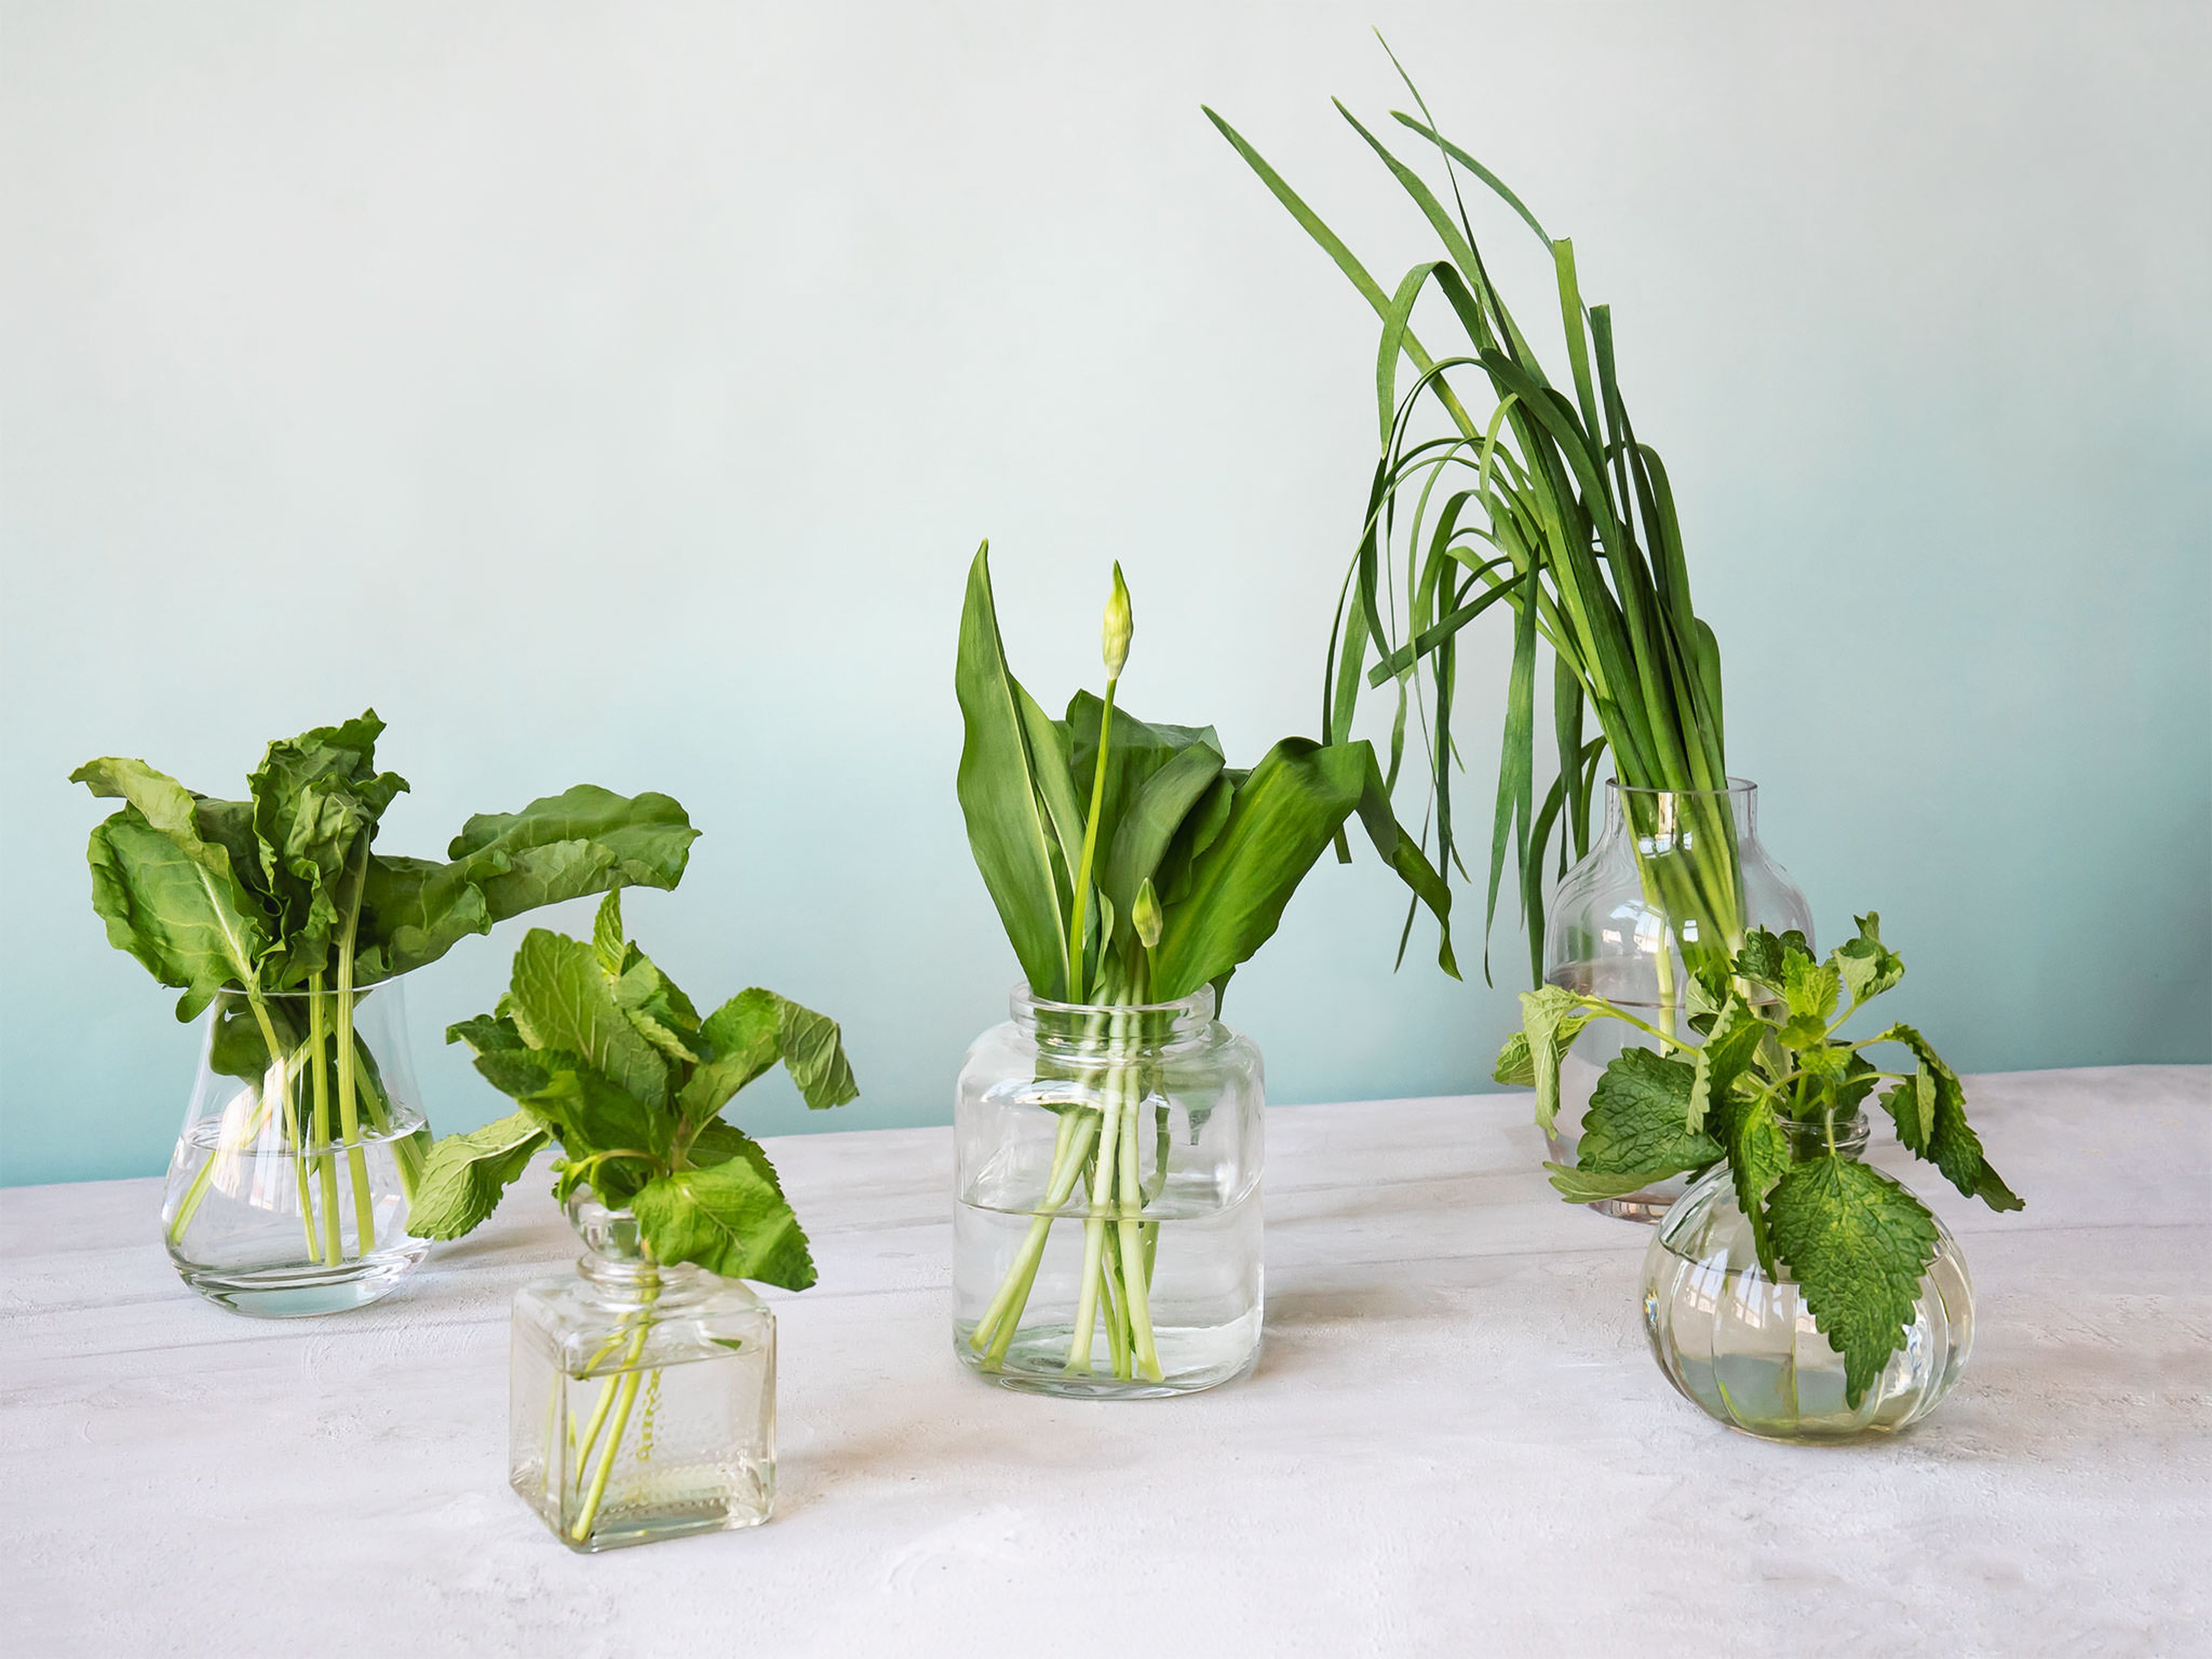 5 Little-Known Spring Herbs That Belong in Your Kitchen